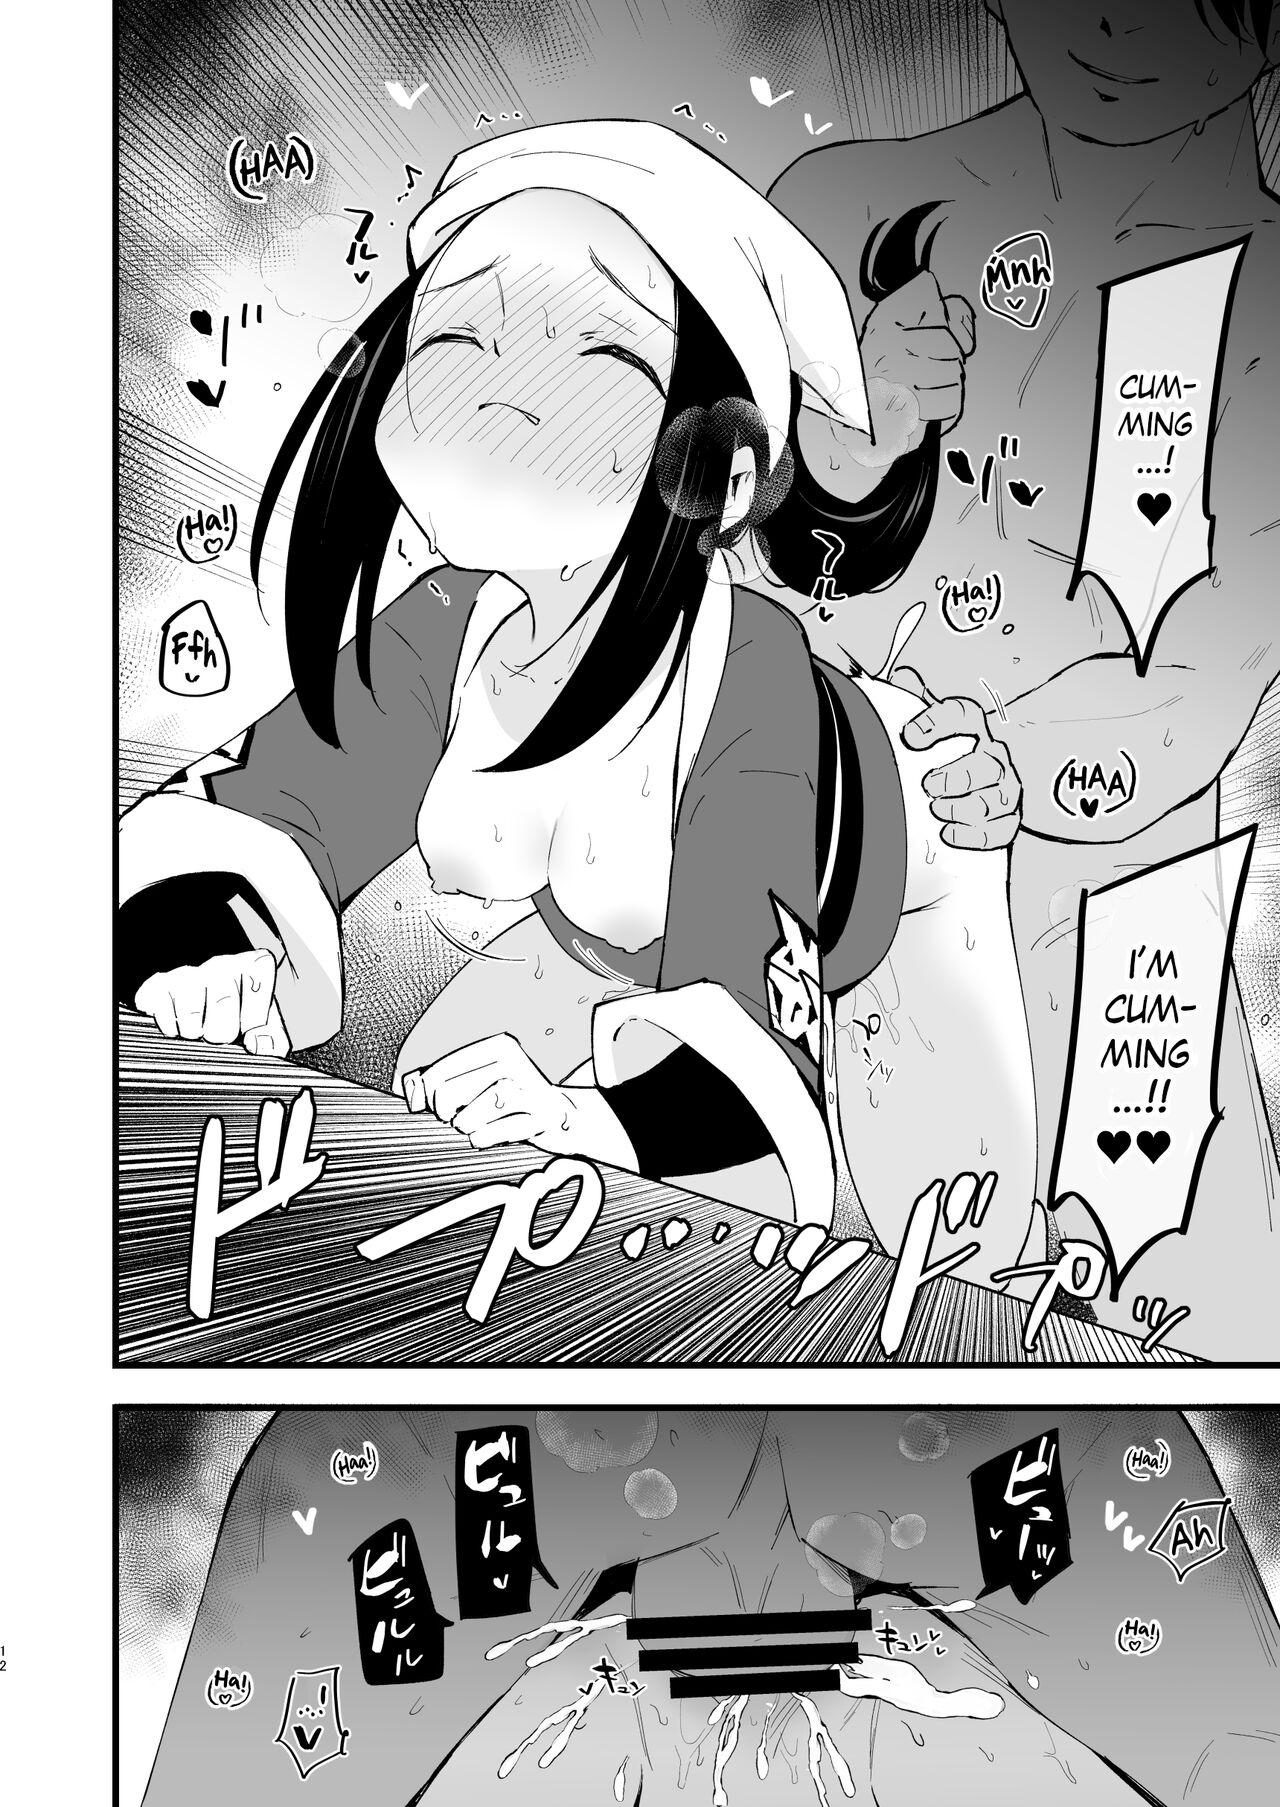 Spoon Hisui Tensei-roku | Records of my reincarnation in Hisui - Pokemon | pocket monsters 3some - Page 11